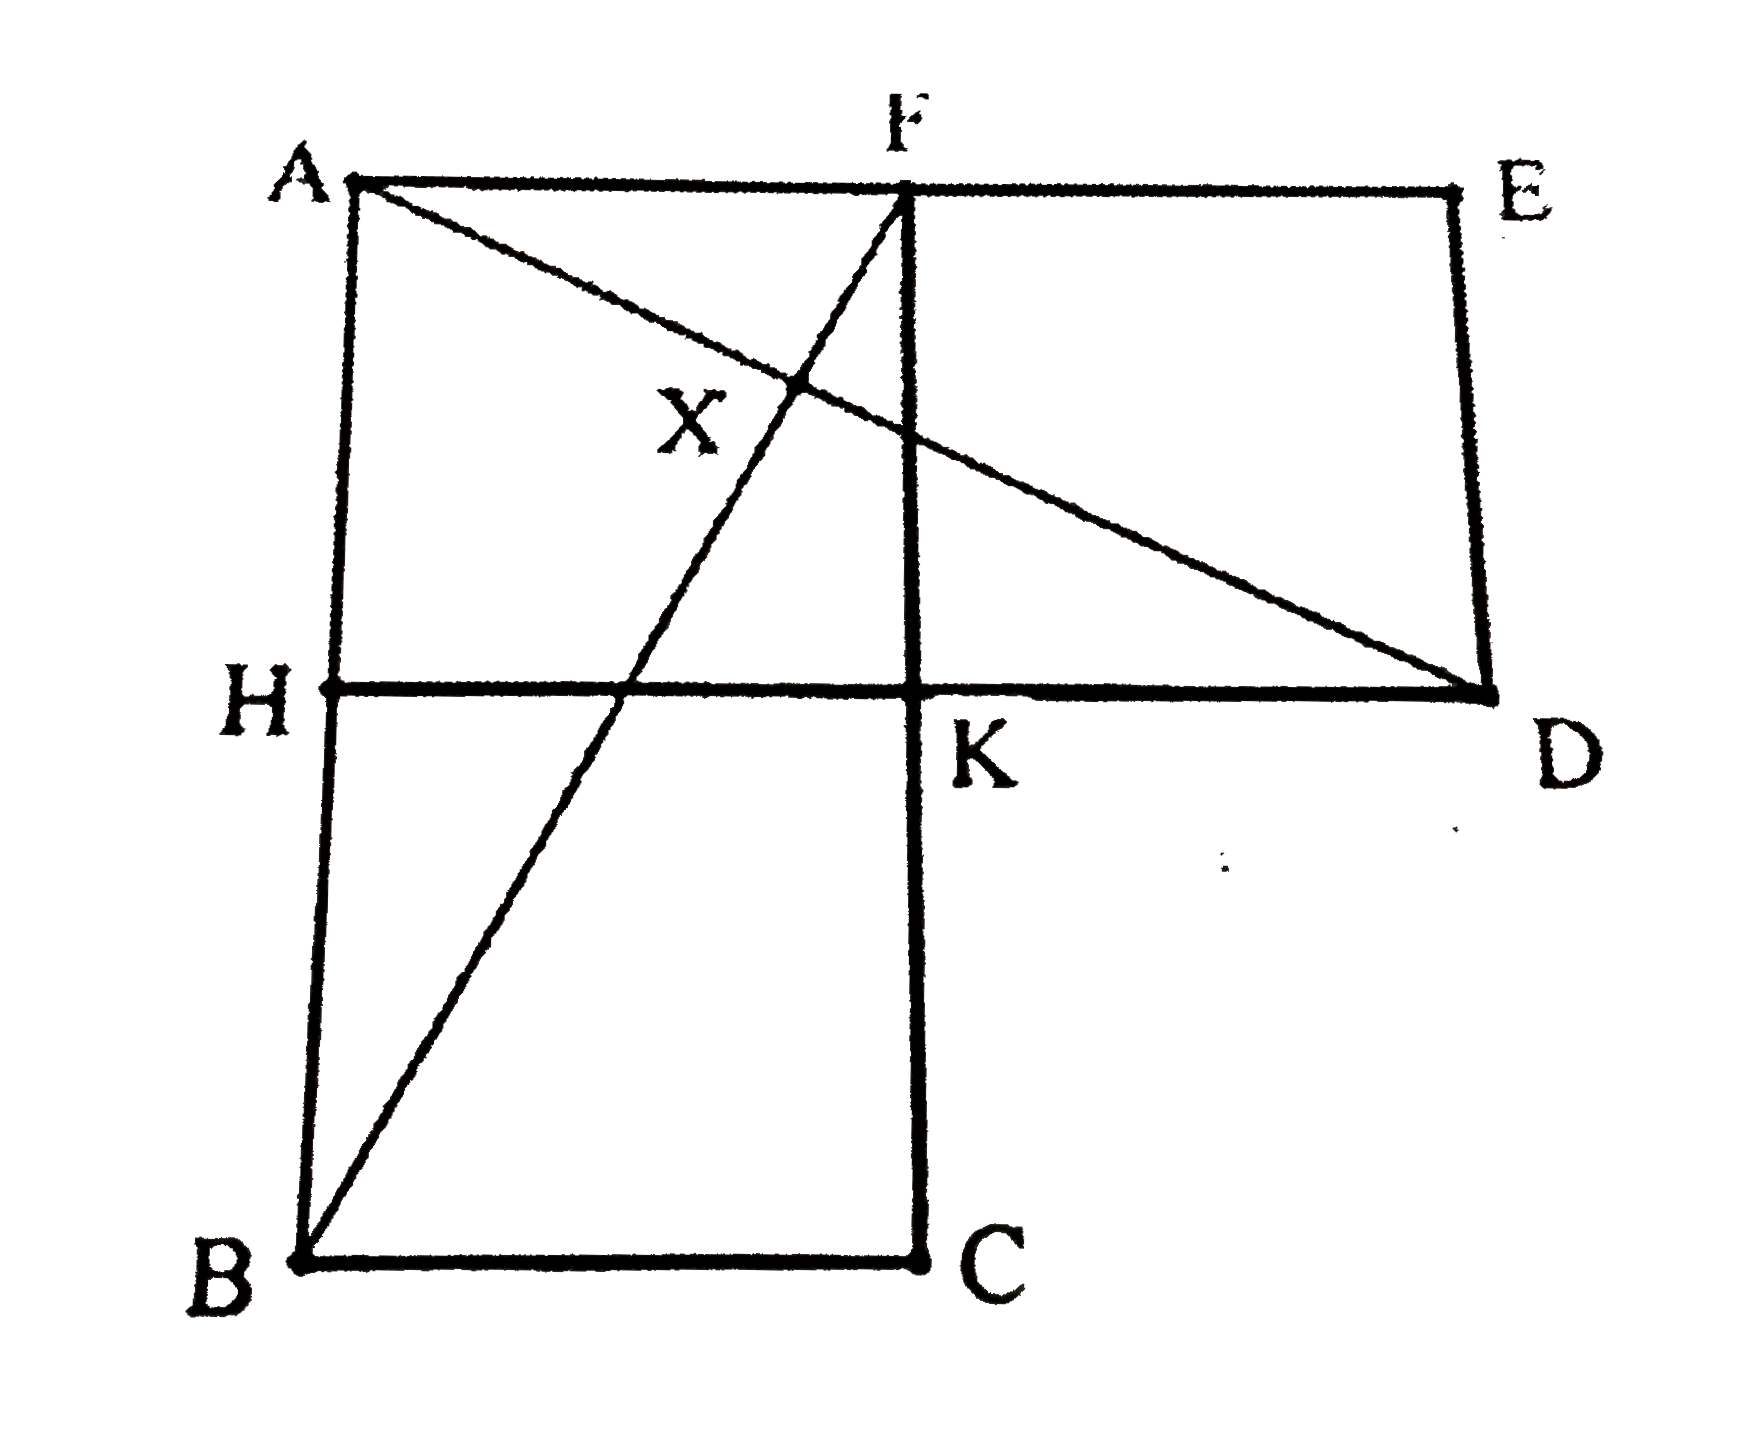 In the figure AHKF, FKDE and HBCK are unit squares, AD and BF intersect in  X. Then the ratio of the areas fo triangles AXF and ABF is-